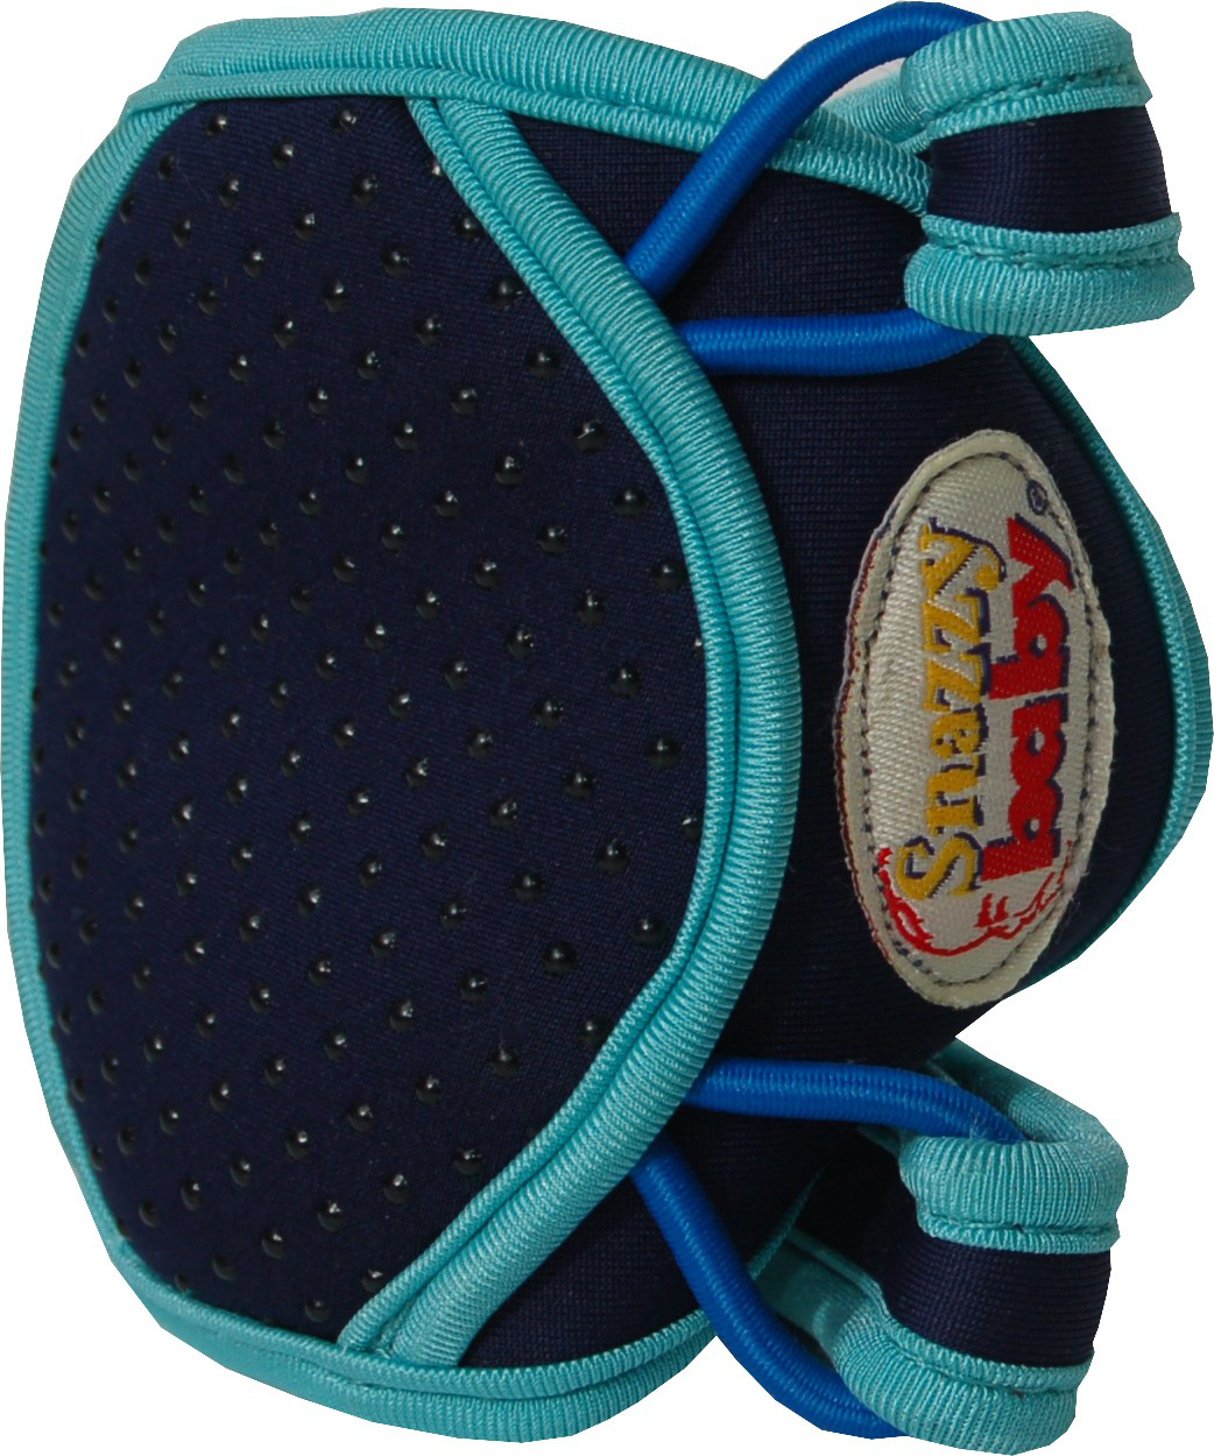 Top 9 Best Baby Knee Pads for Crawling Reviews in 2023 4